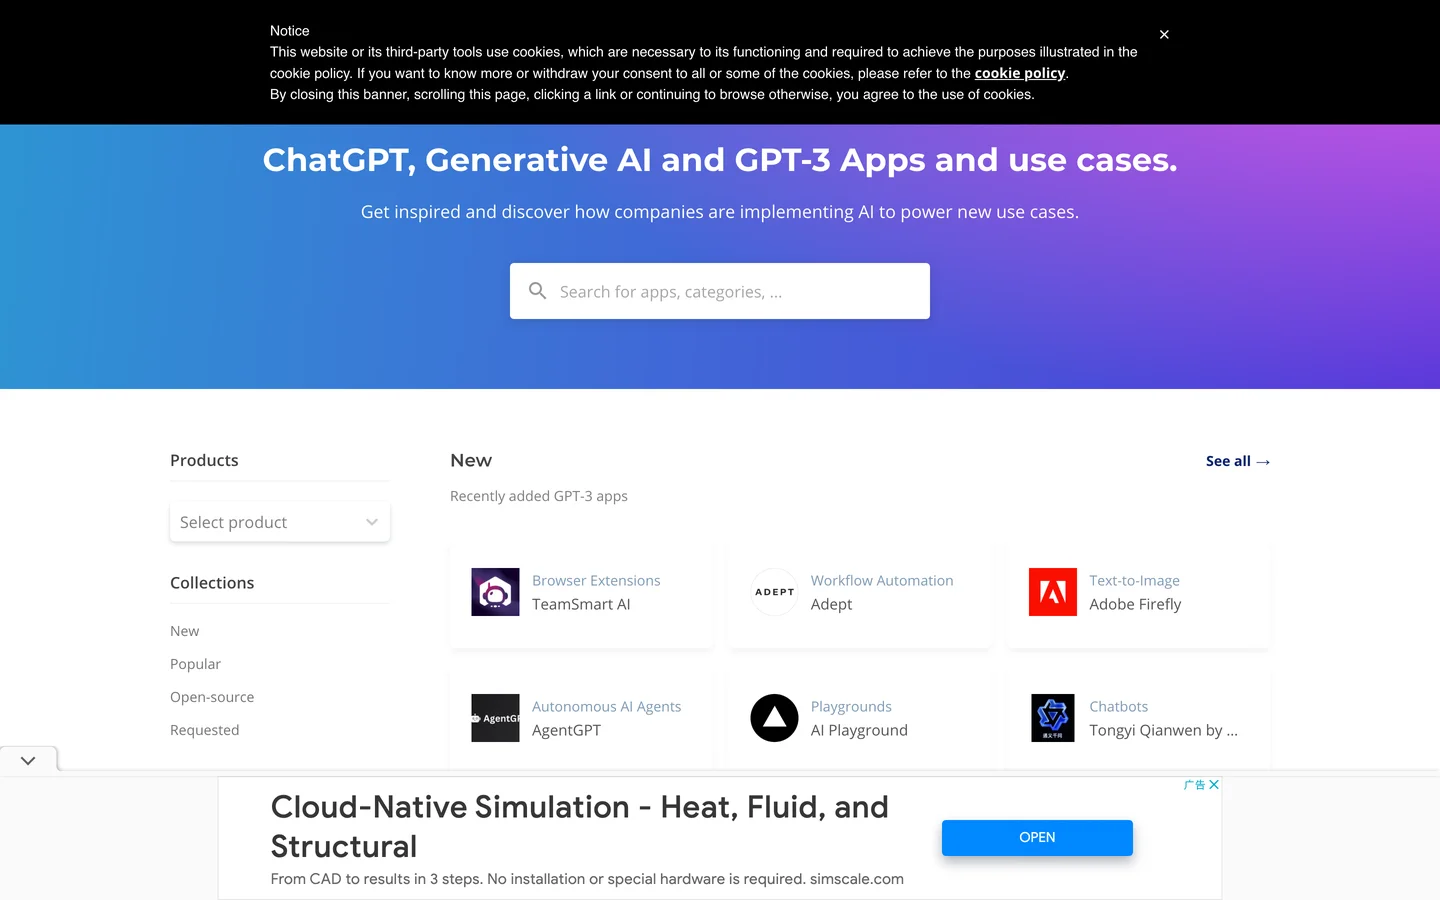 "800+ ChatGPT and GPT-3 Examples, Demos, Apps, Showcase, and Generative AI Use-cases | Discover AI use cases"